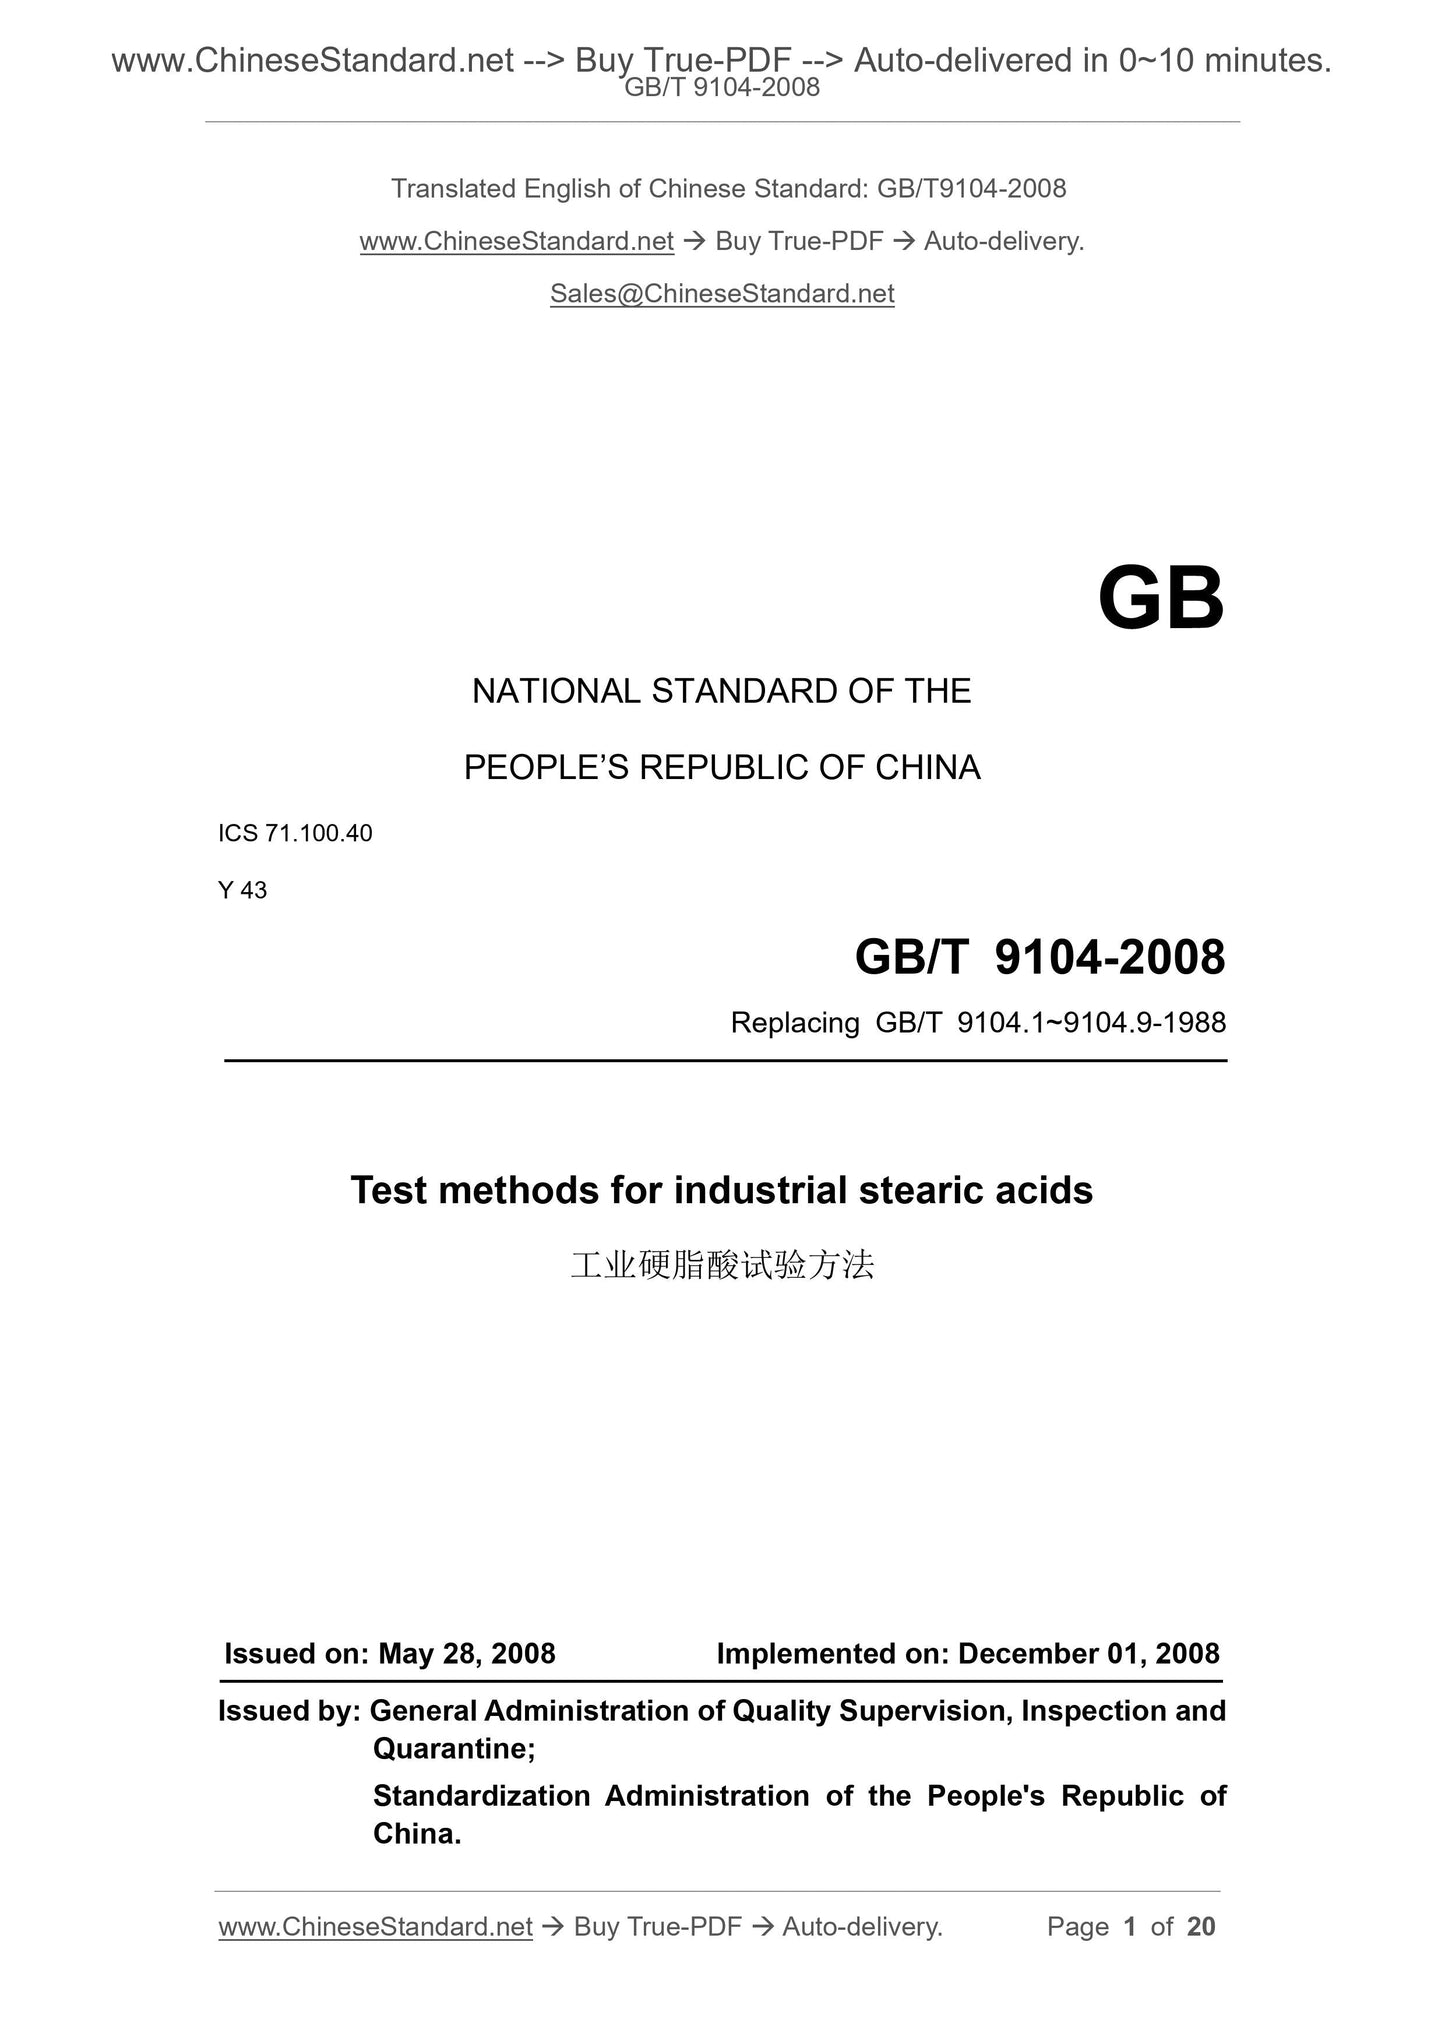 GB/T 9104-2008 Page 1